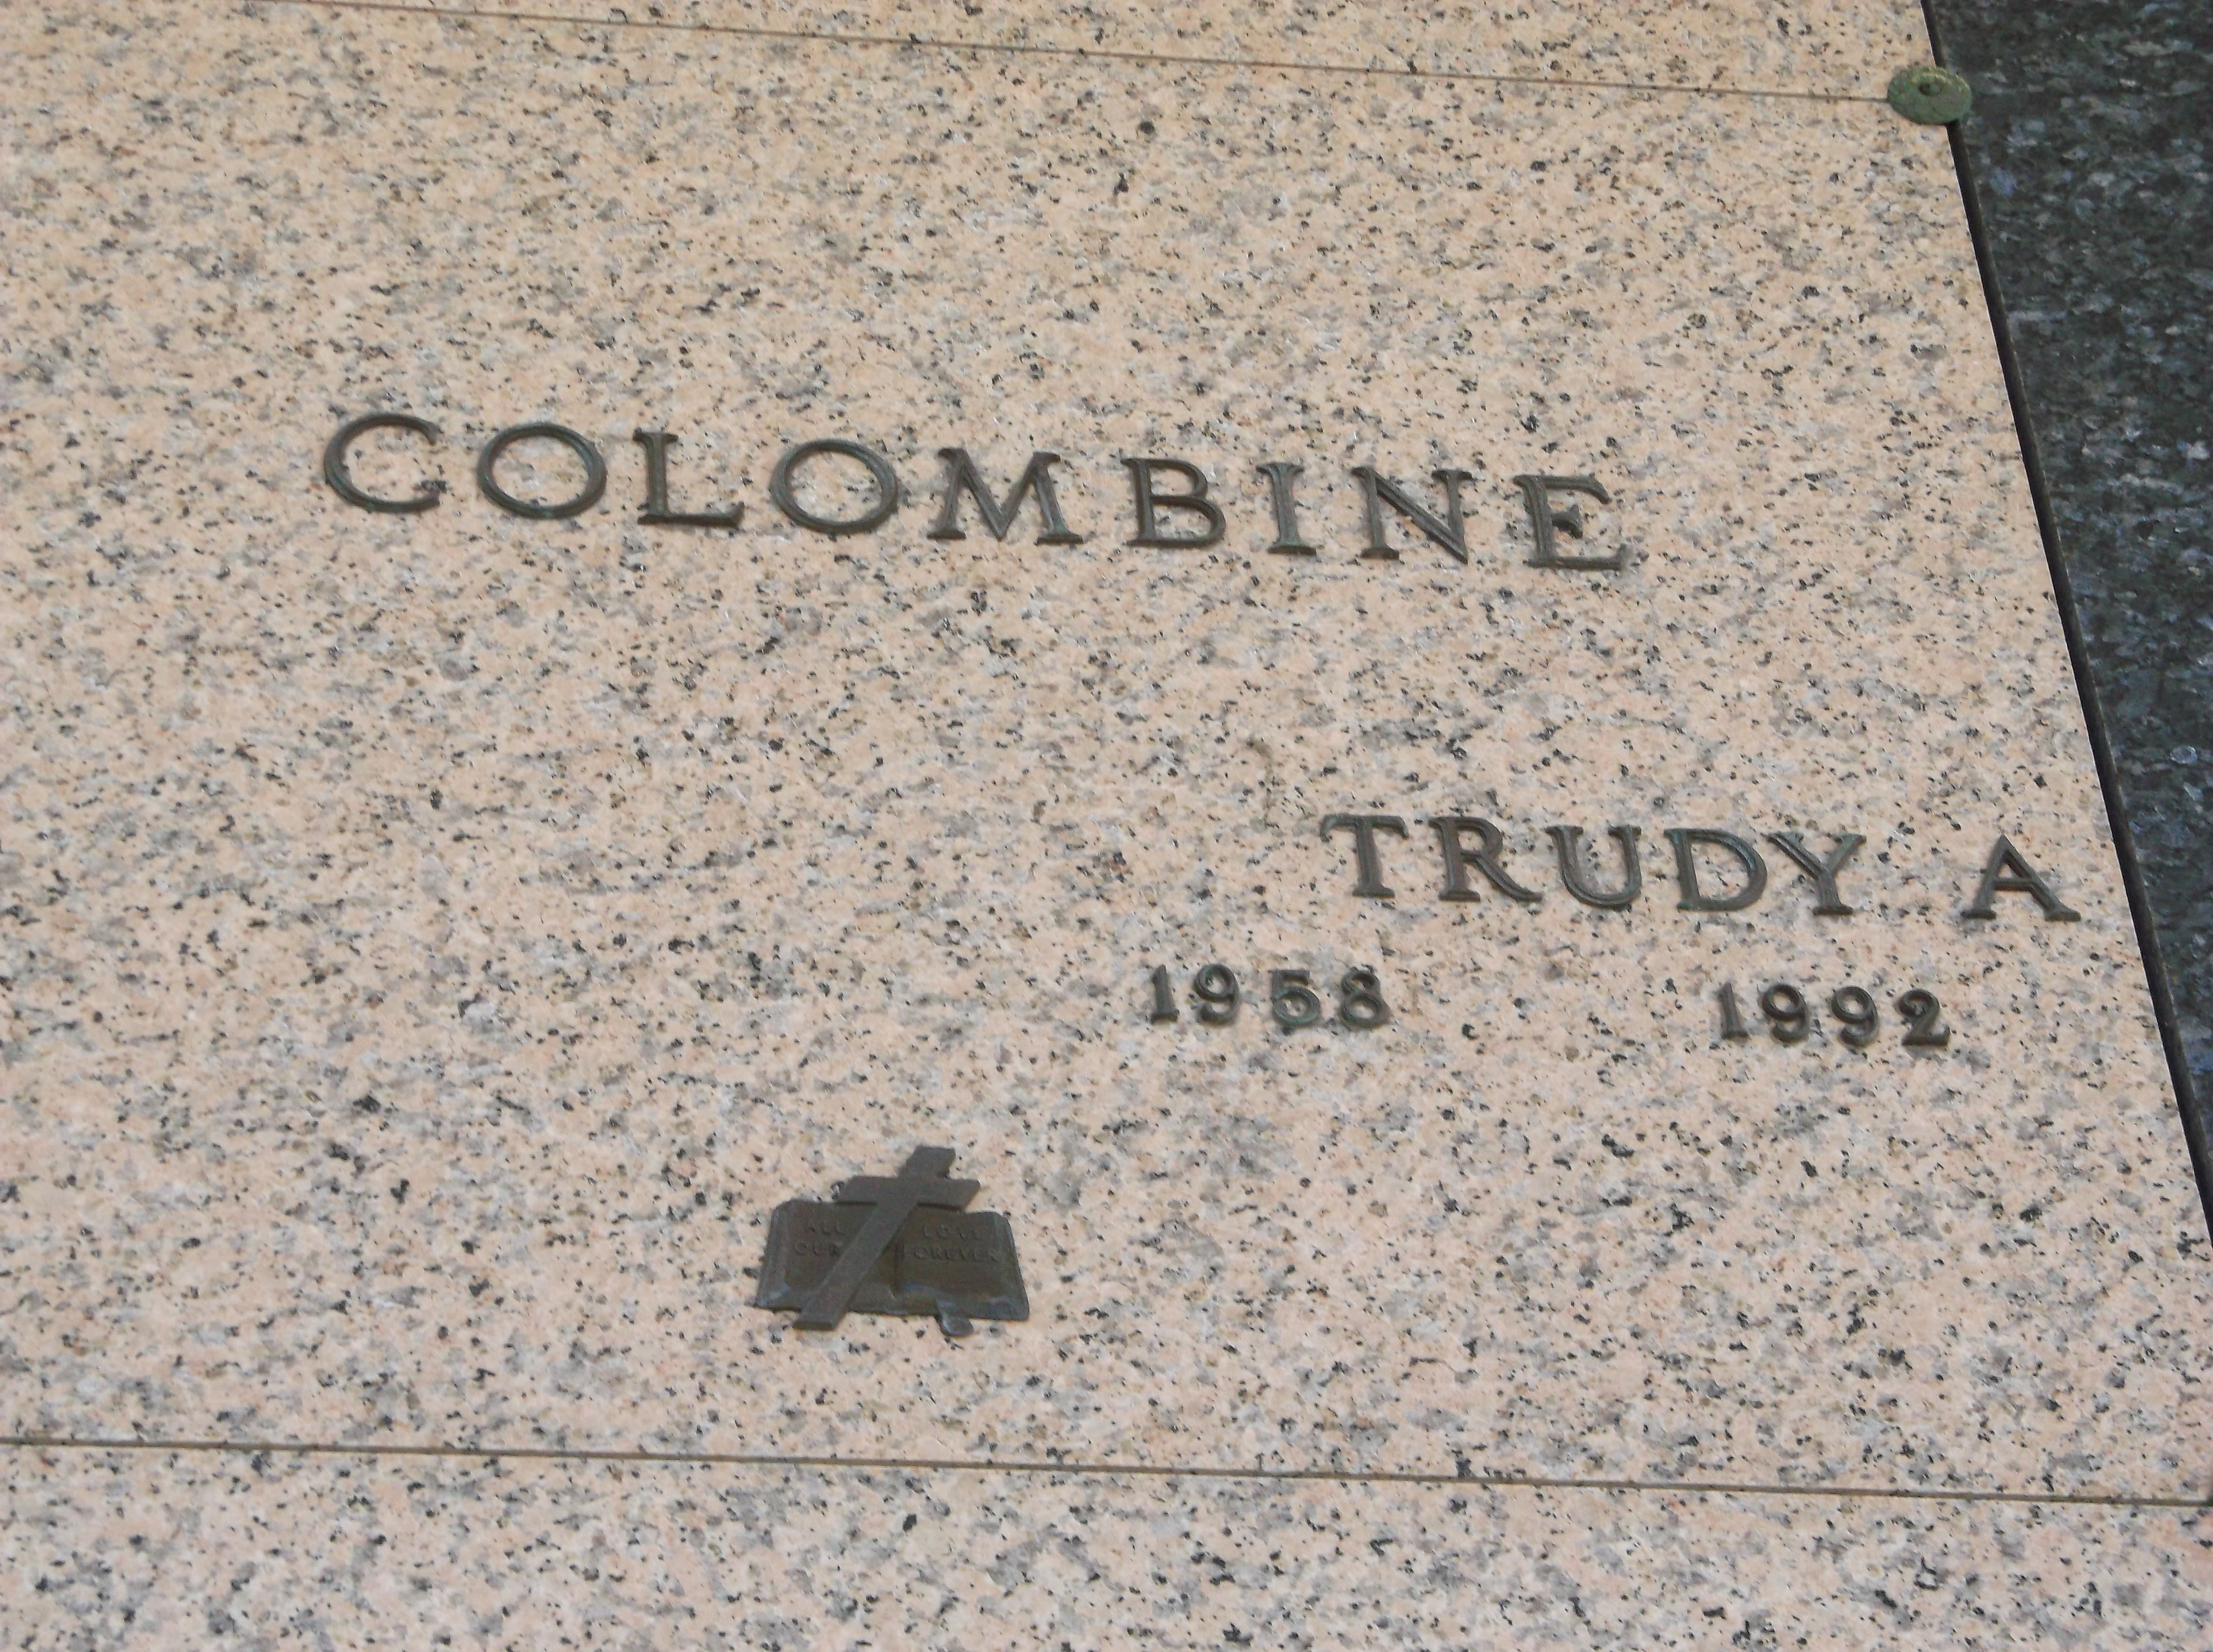 Trudy A Colombine